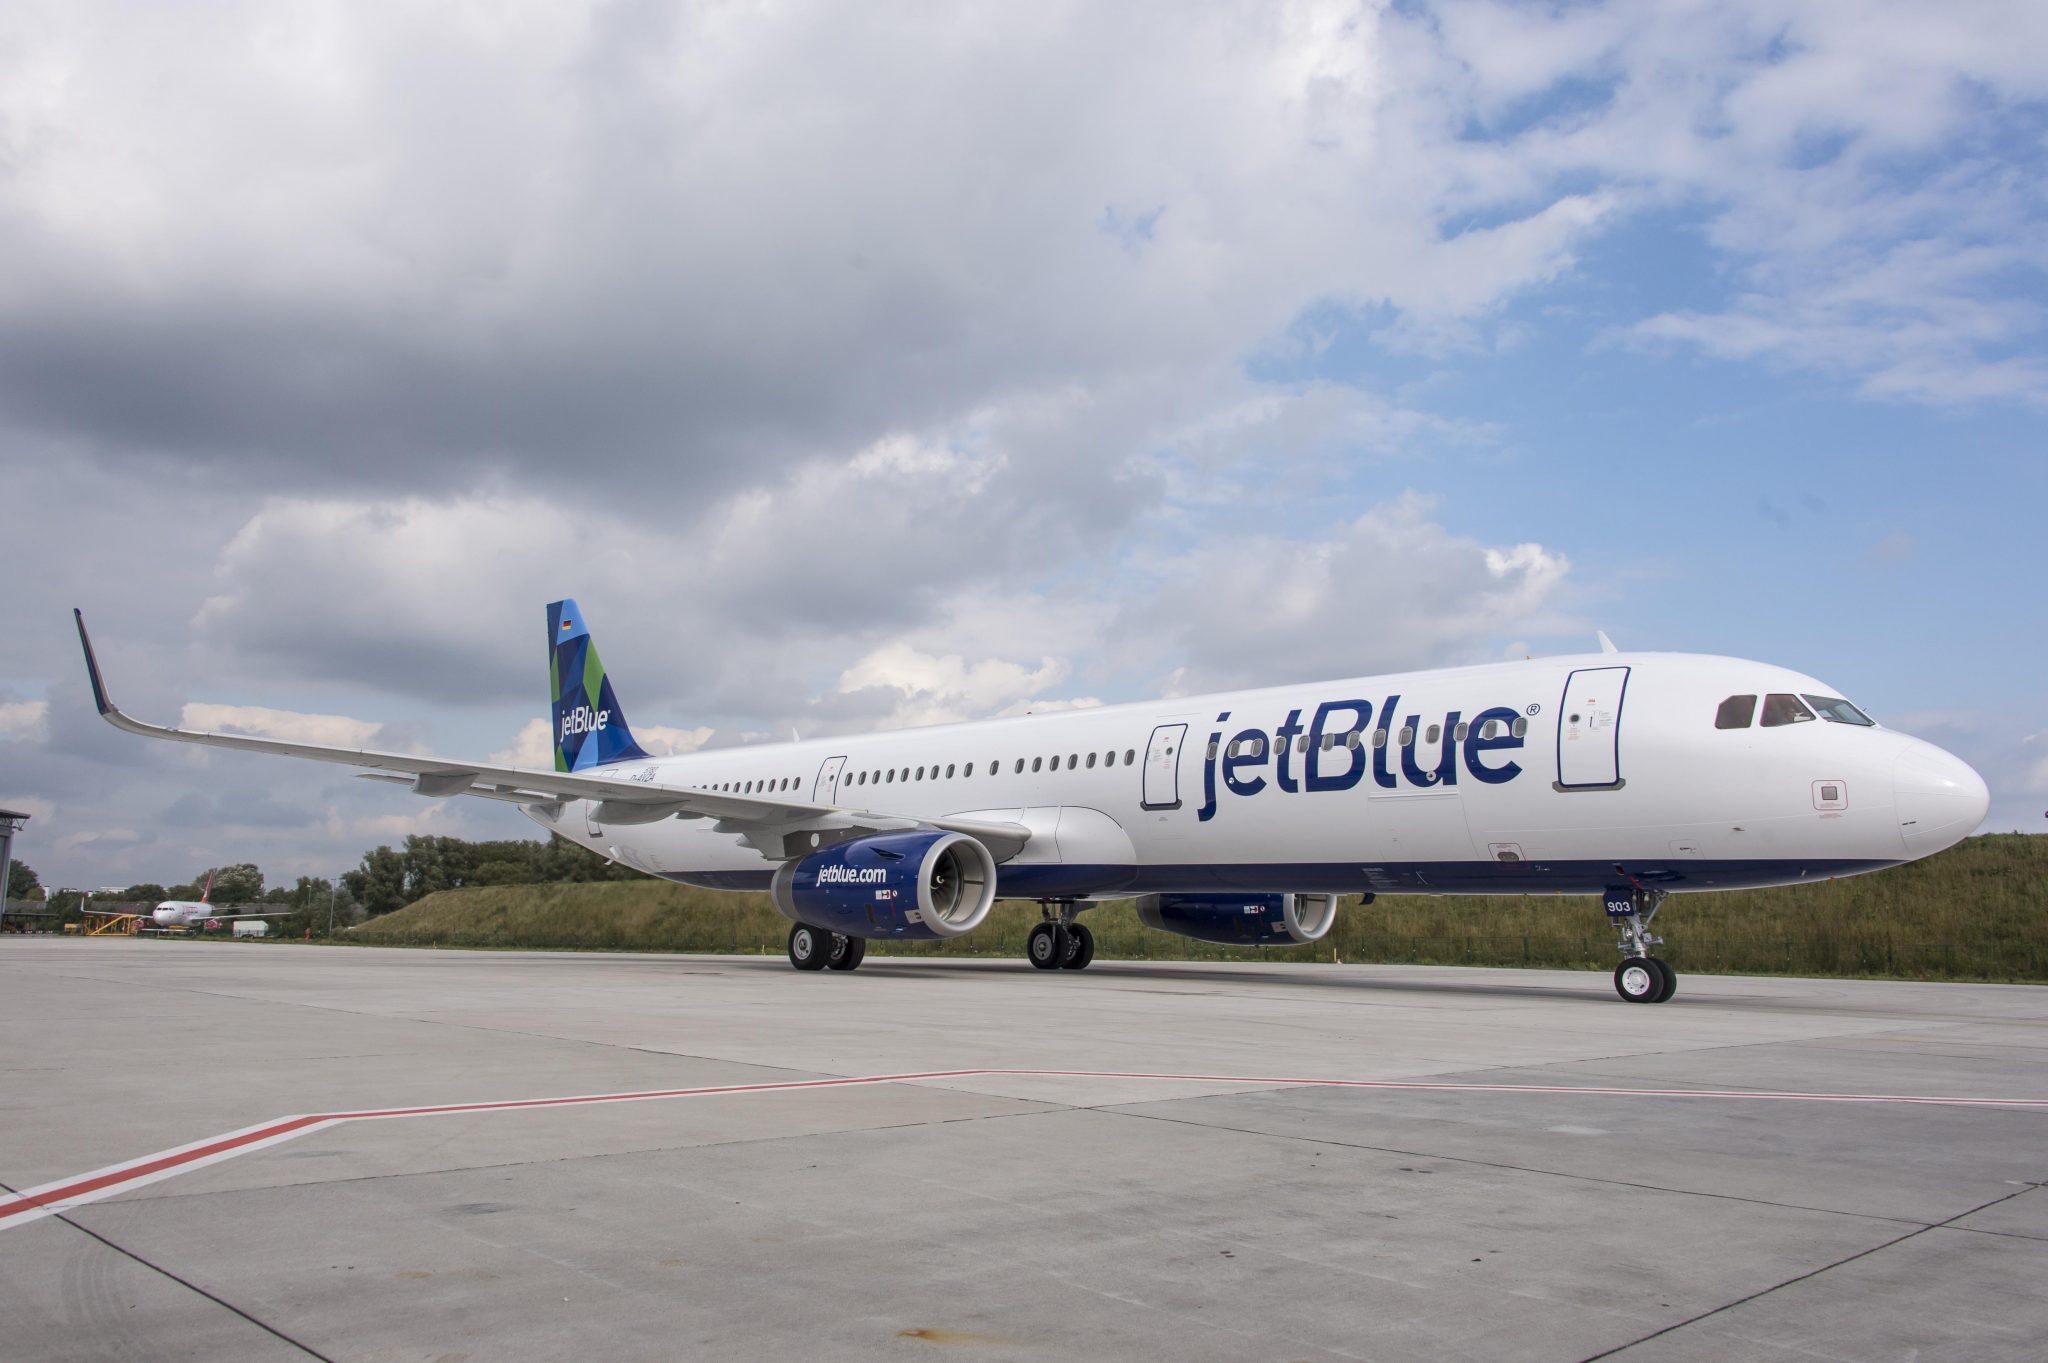 Qatar and JetBlue expand codeshare to offer over 150 destinations